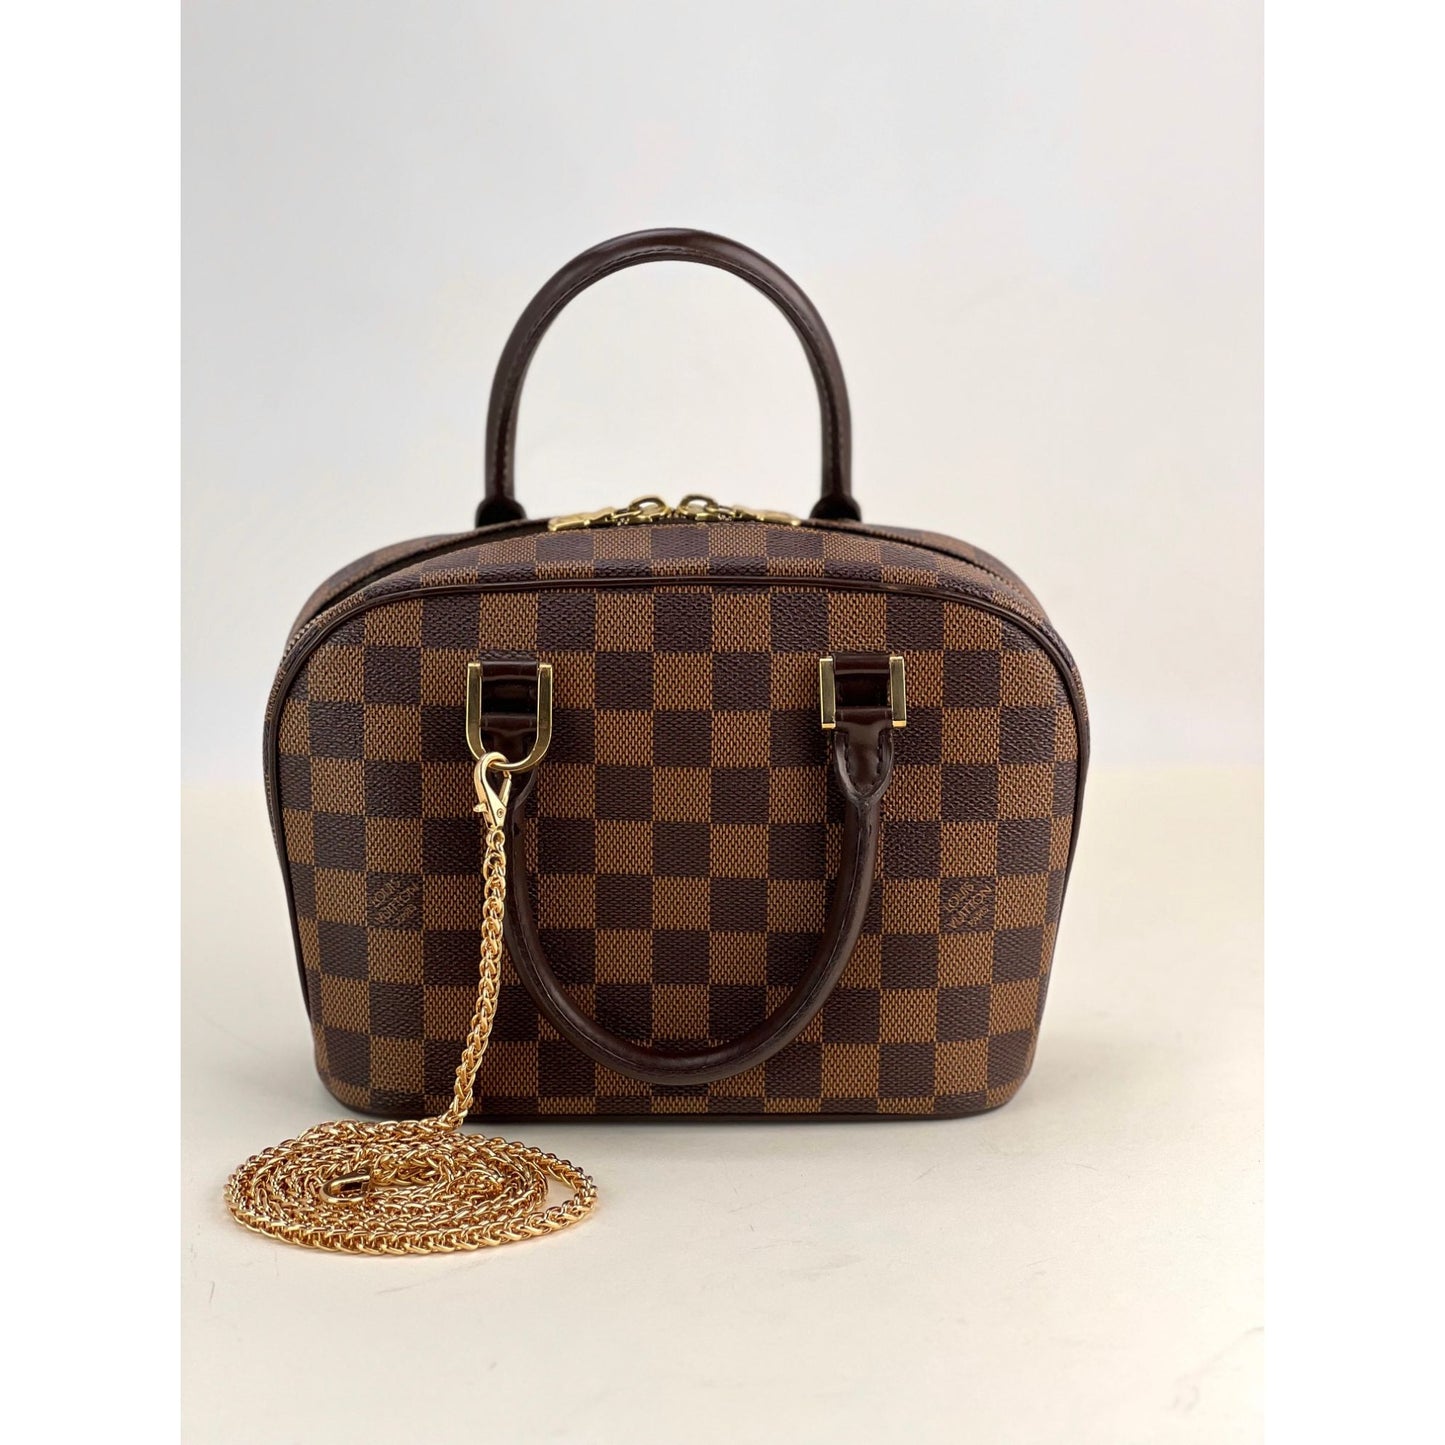 Louis Vuitton Bags I'd Buy Again (Or Not!) in 2023  Alma, Speedy,  Neverfull, Felicie + More! 